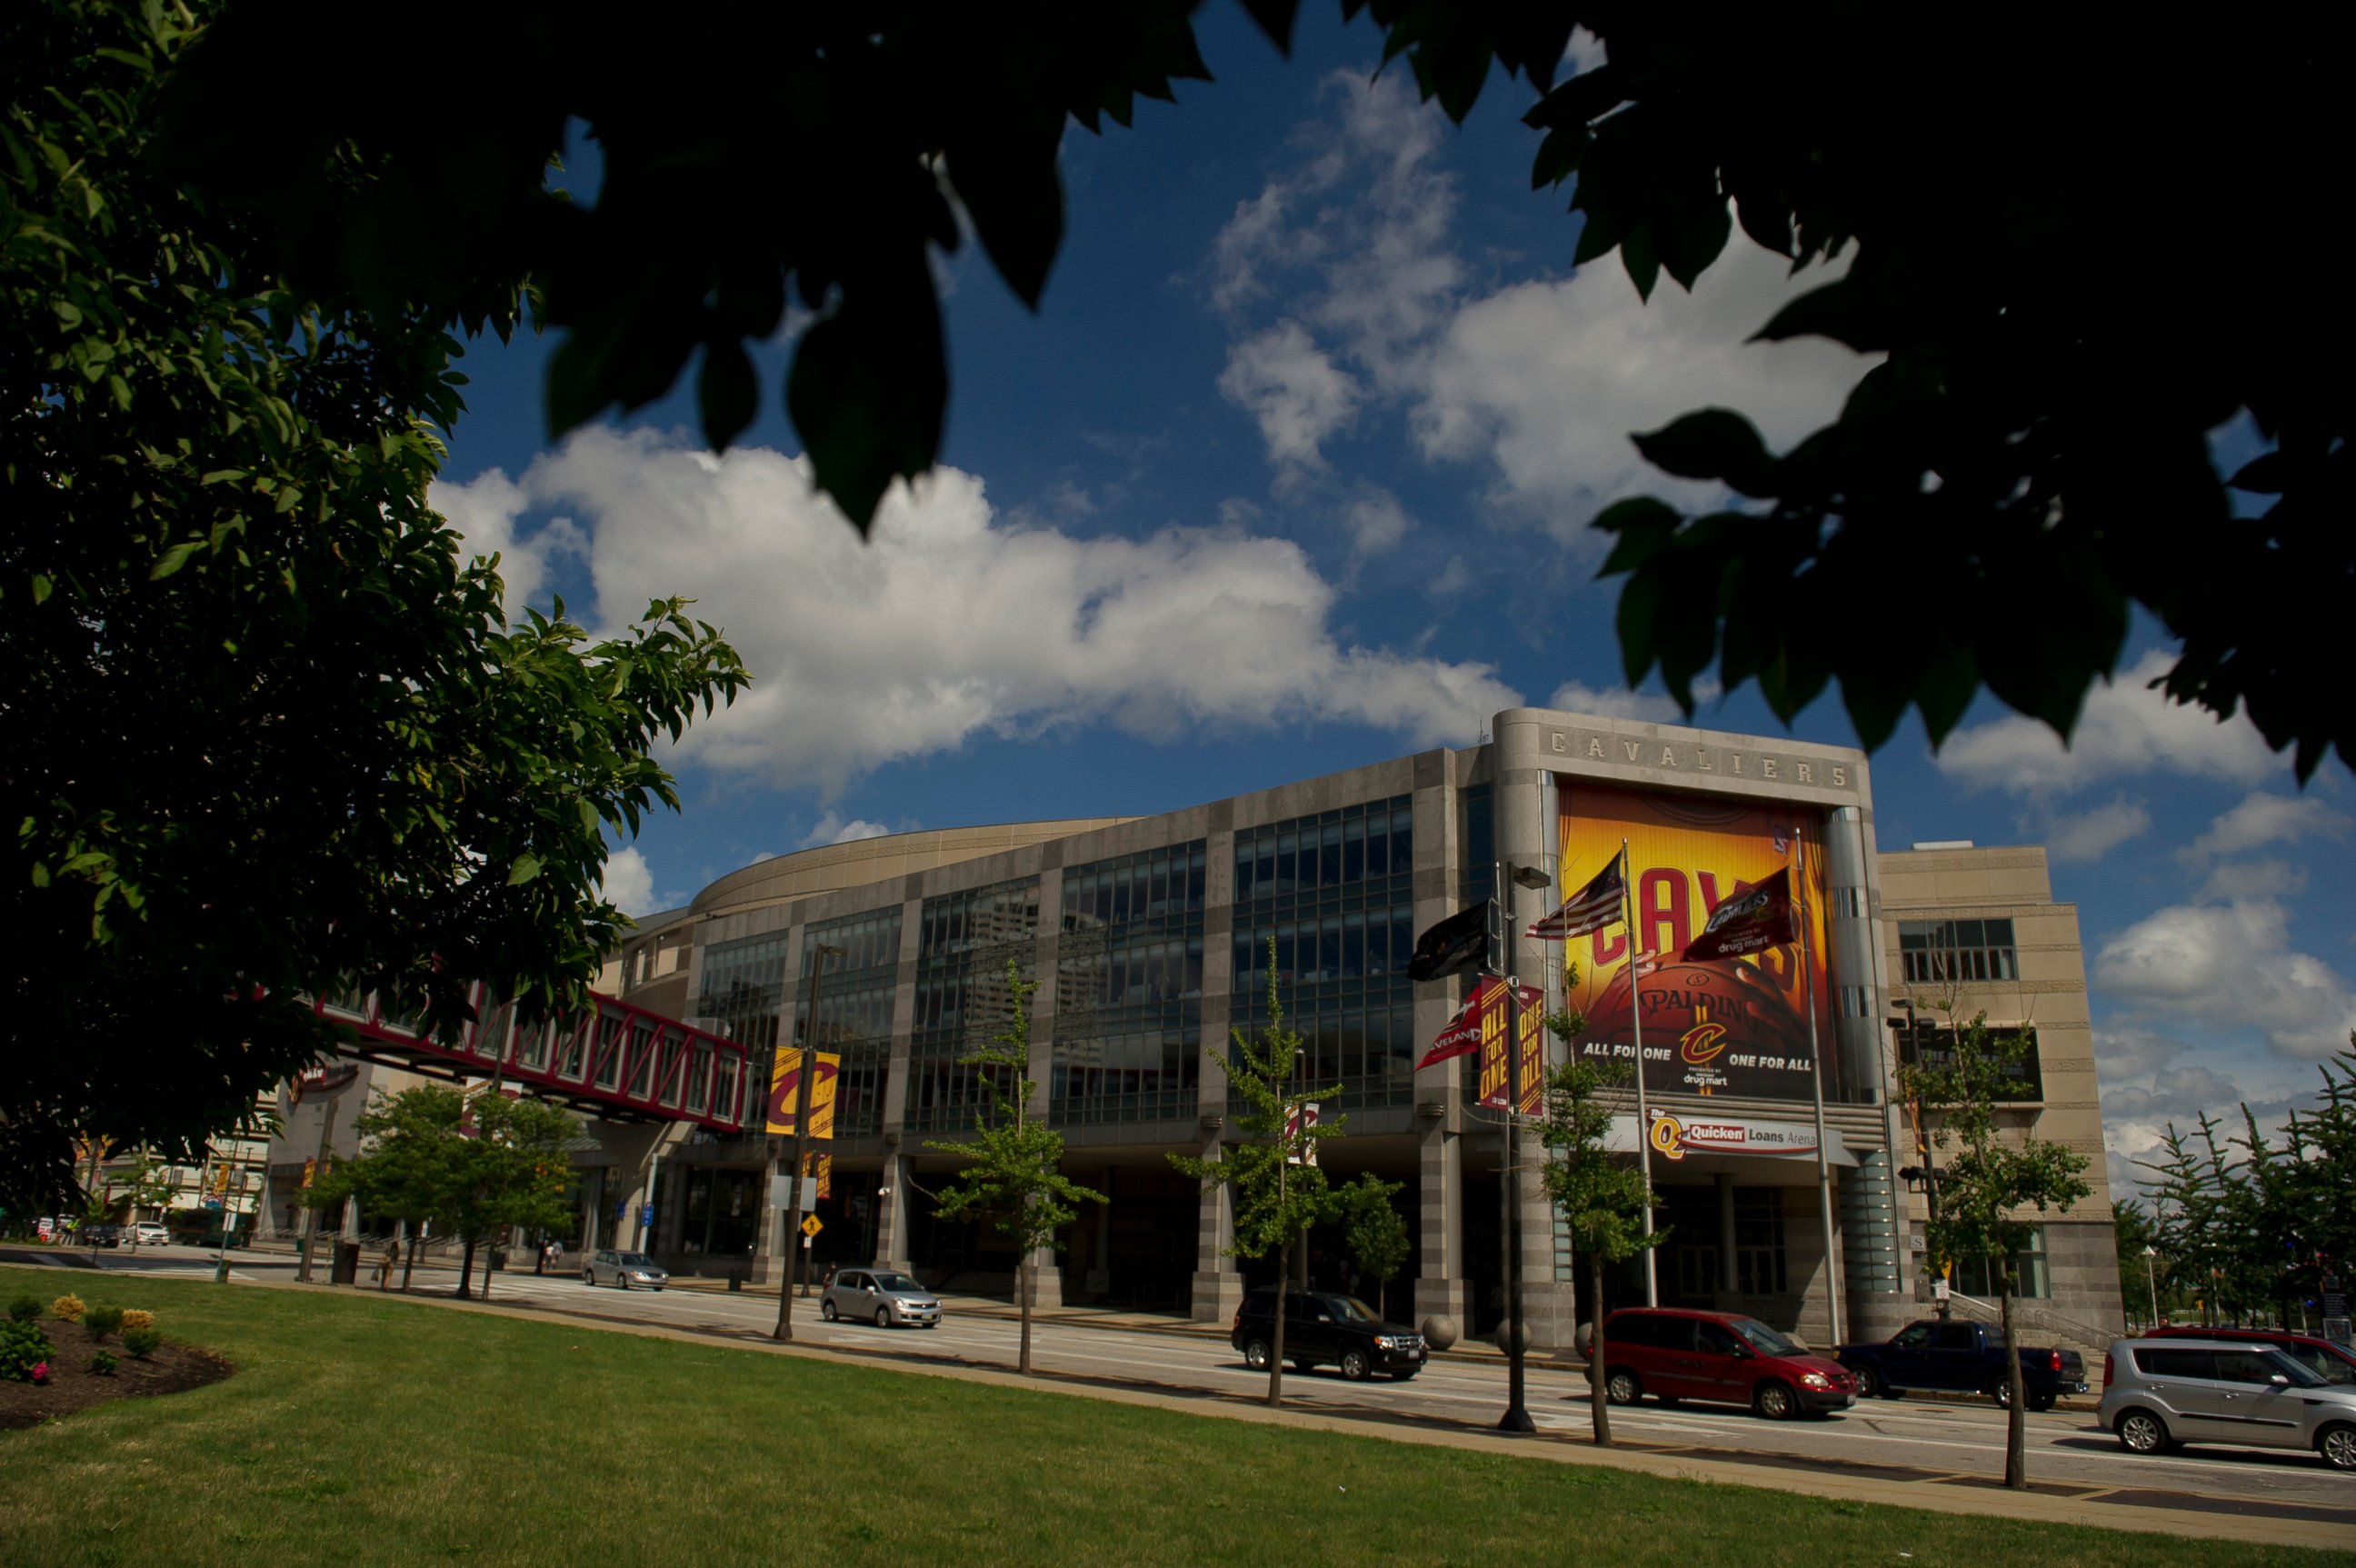 PHOTO: The Quicken Loans Arena is pictured on July 8, 2014 in Cleveland, Ohio.  